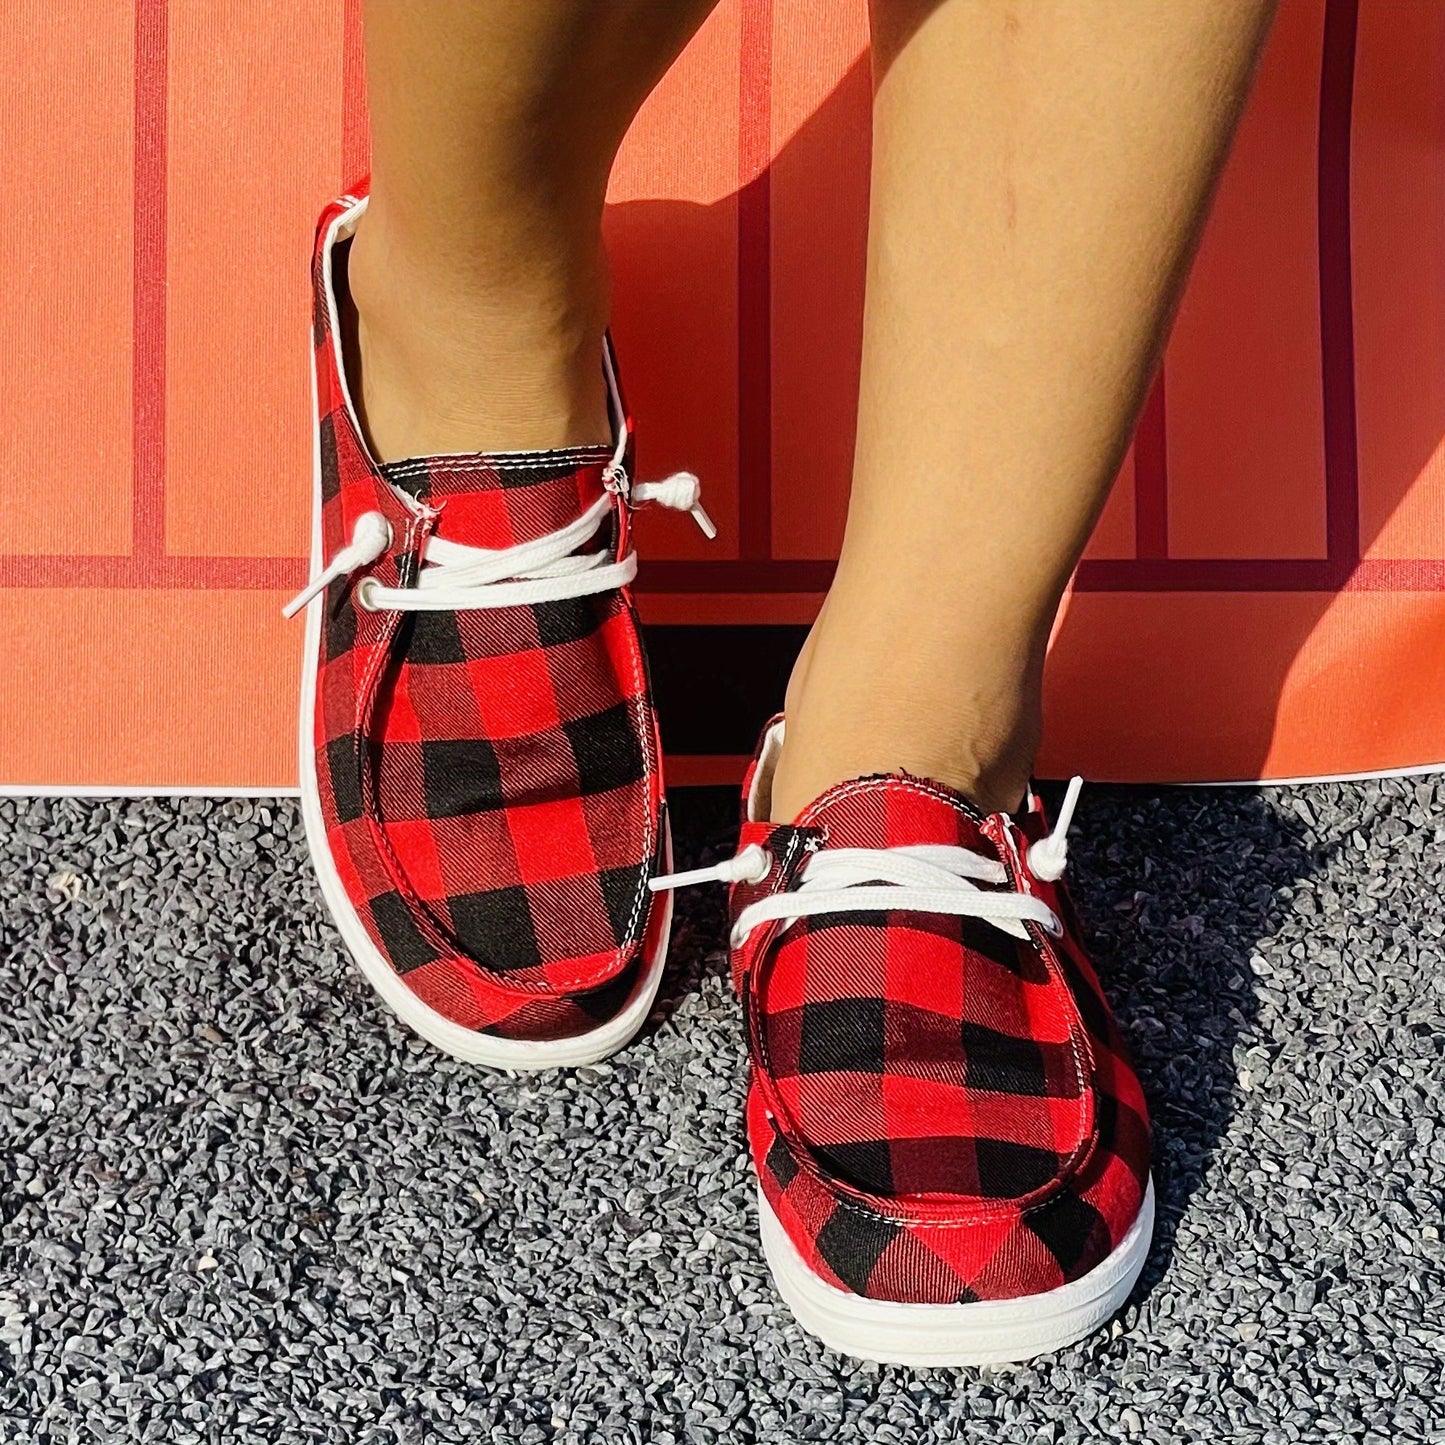 Women's Red Plaid Pattern Canvas Sneakers, Casual Lace Up Low Top Flat Shoes, Lightweight Walking Shoes